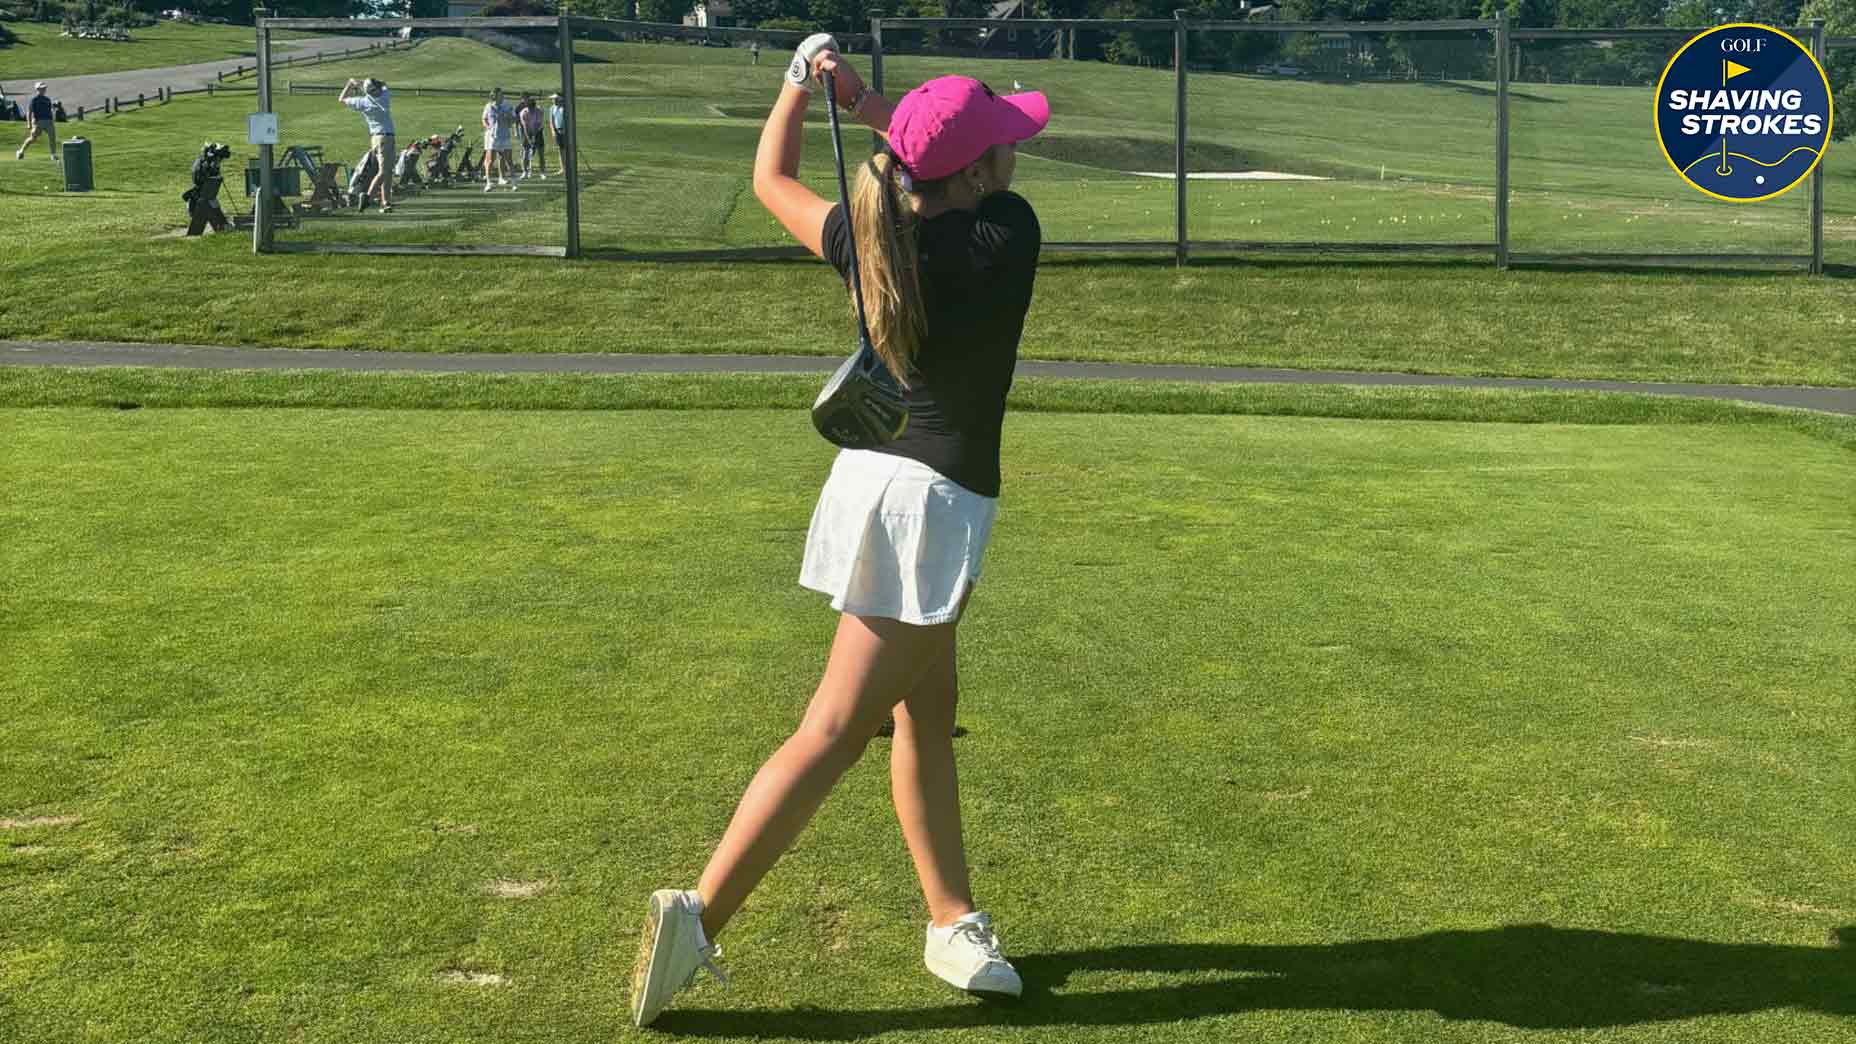 Top 100 Teacher John Dunigan shares the mental tricks he used to help a high-school player calm her golf anxiety and make her school's team